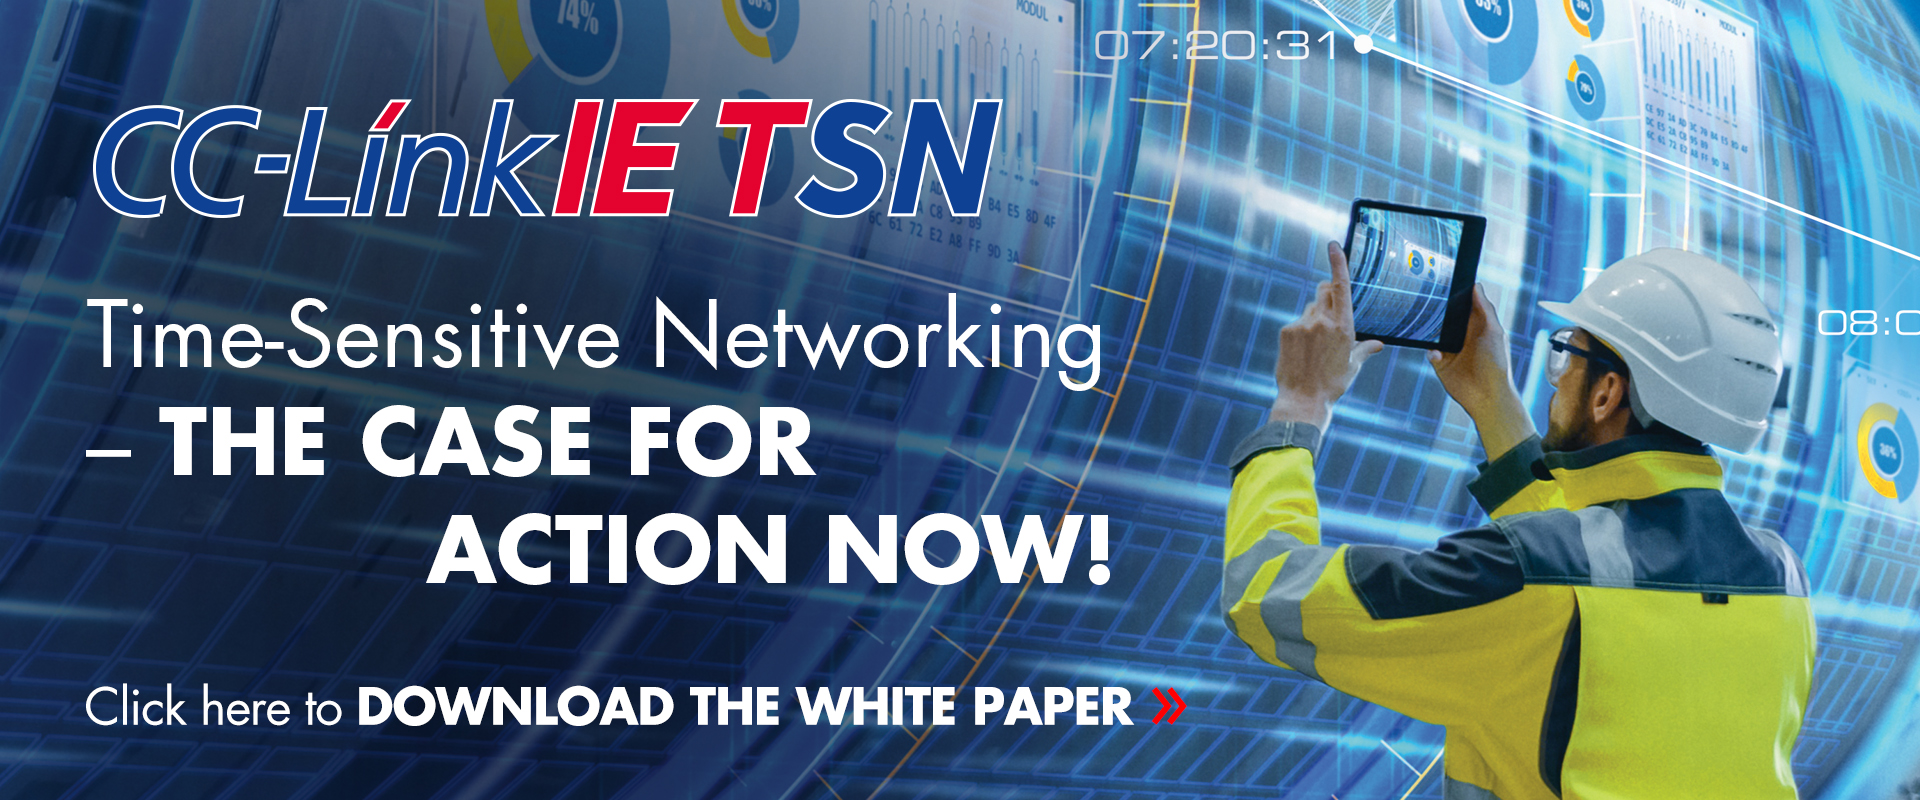 CC-Link IE TSN Time-Sensitive Networking - The Case for Action Now! Click here to download the white paper.